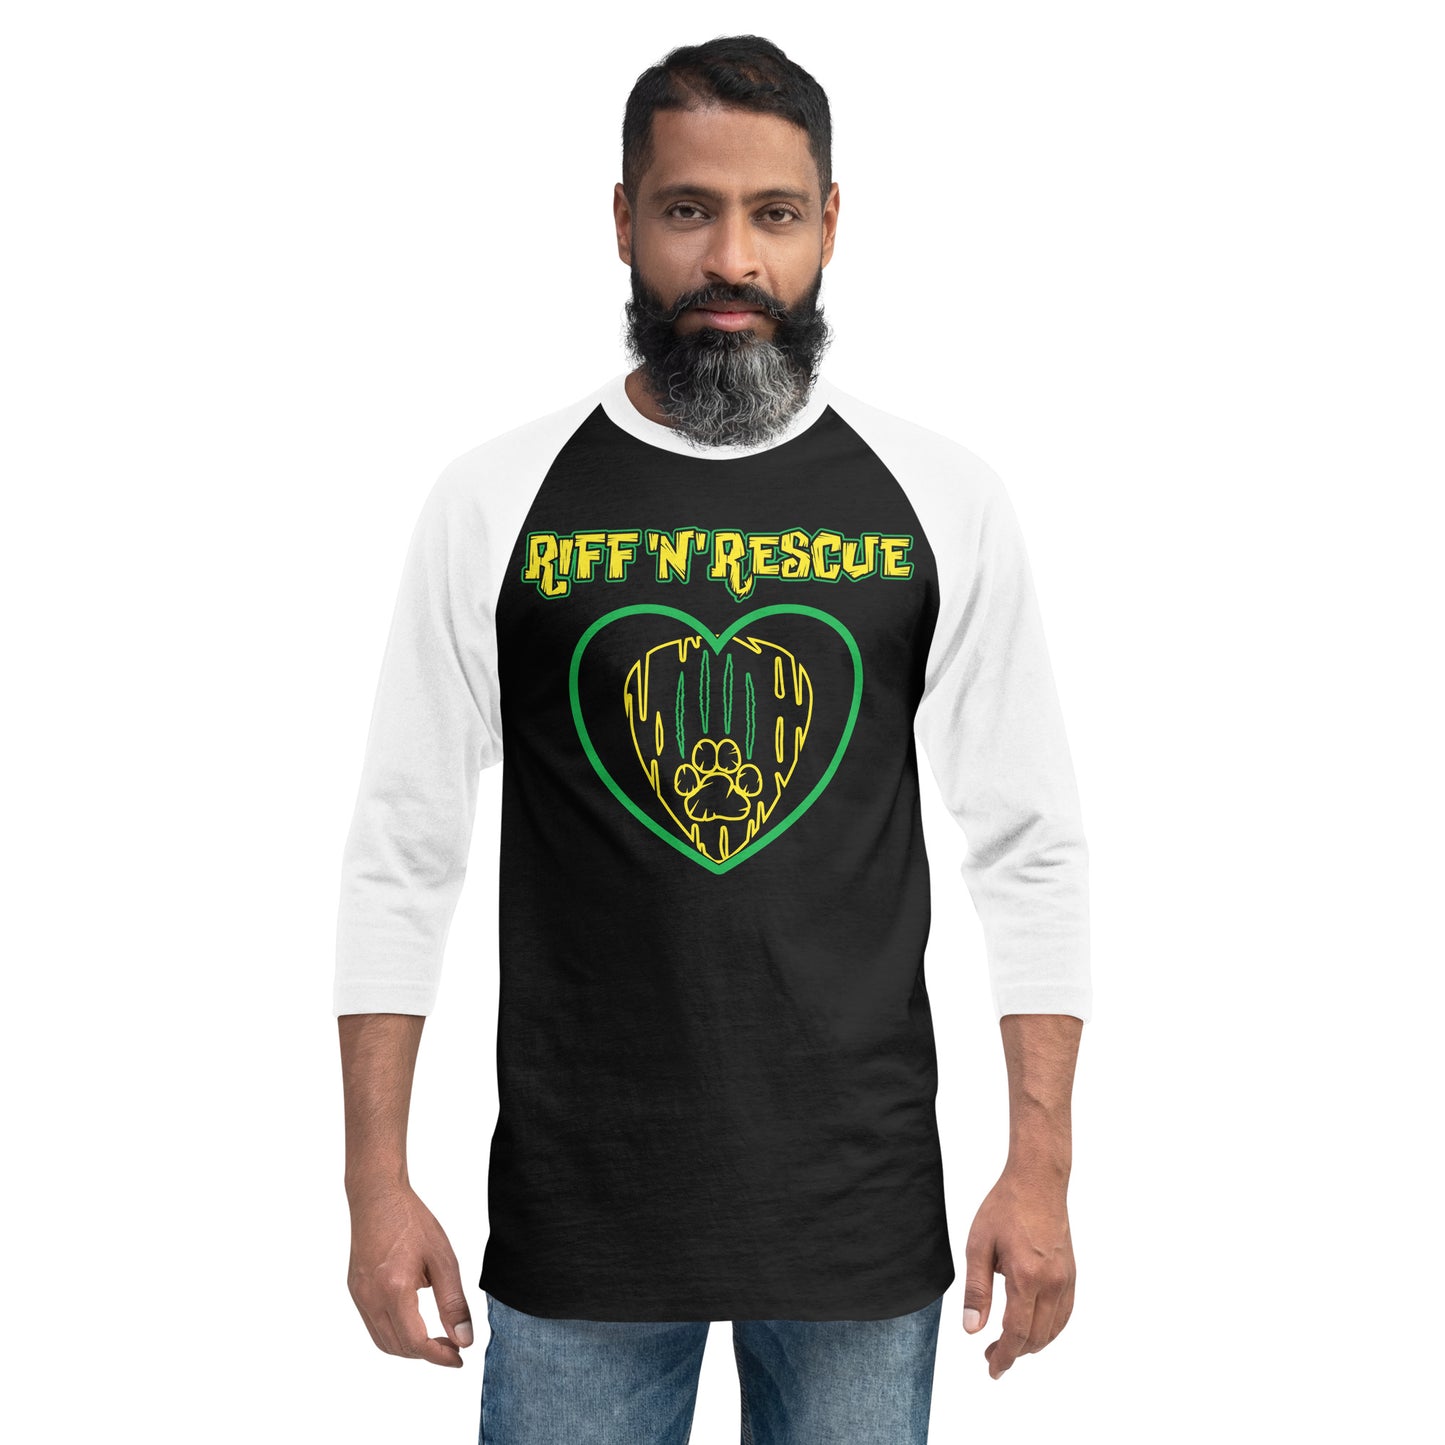 Hearts and Paws Green Cat Raglan